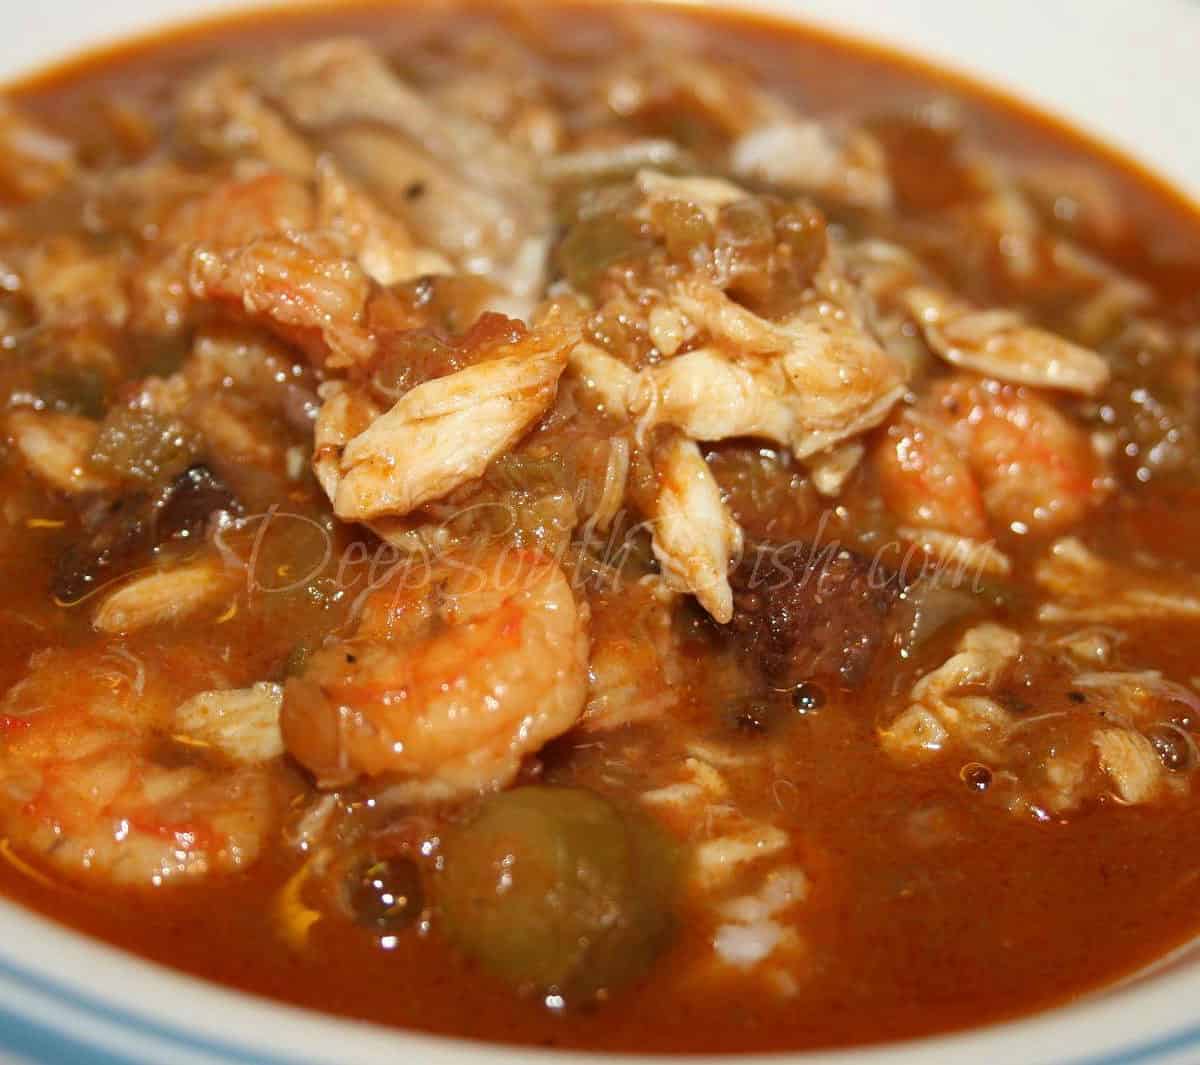  Spice up your dinner table with a steaming hot bowl of oyster and shrimp gumbo